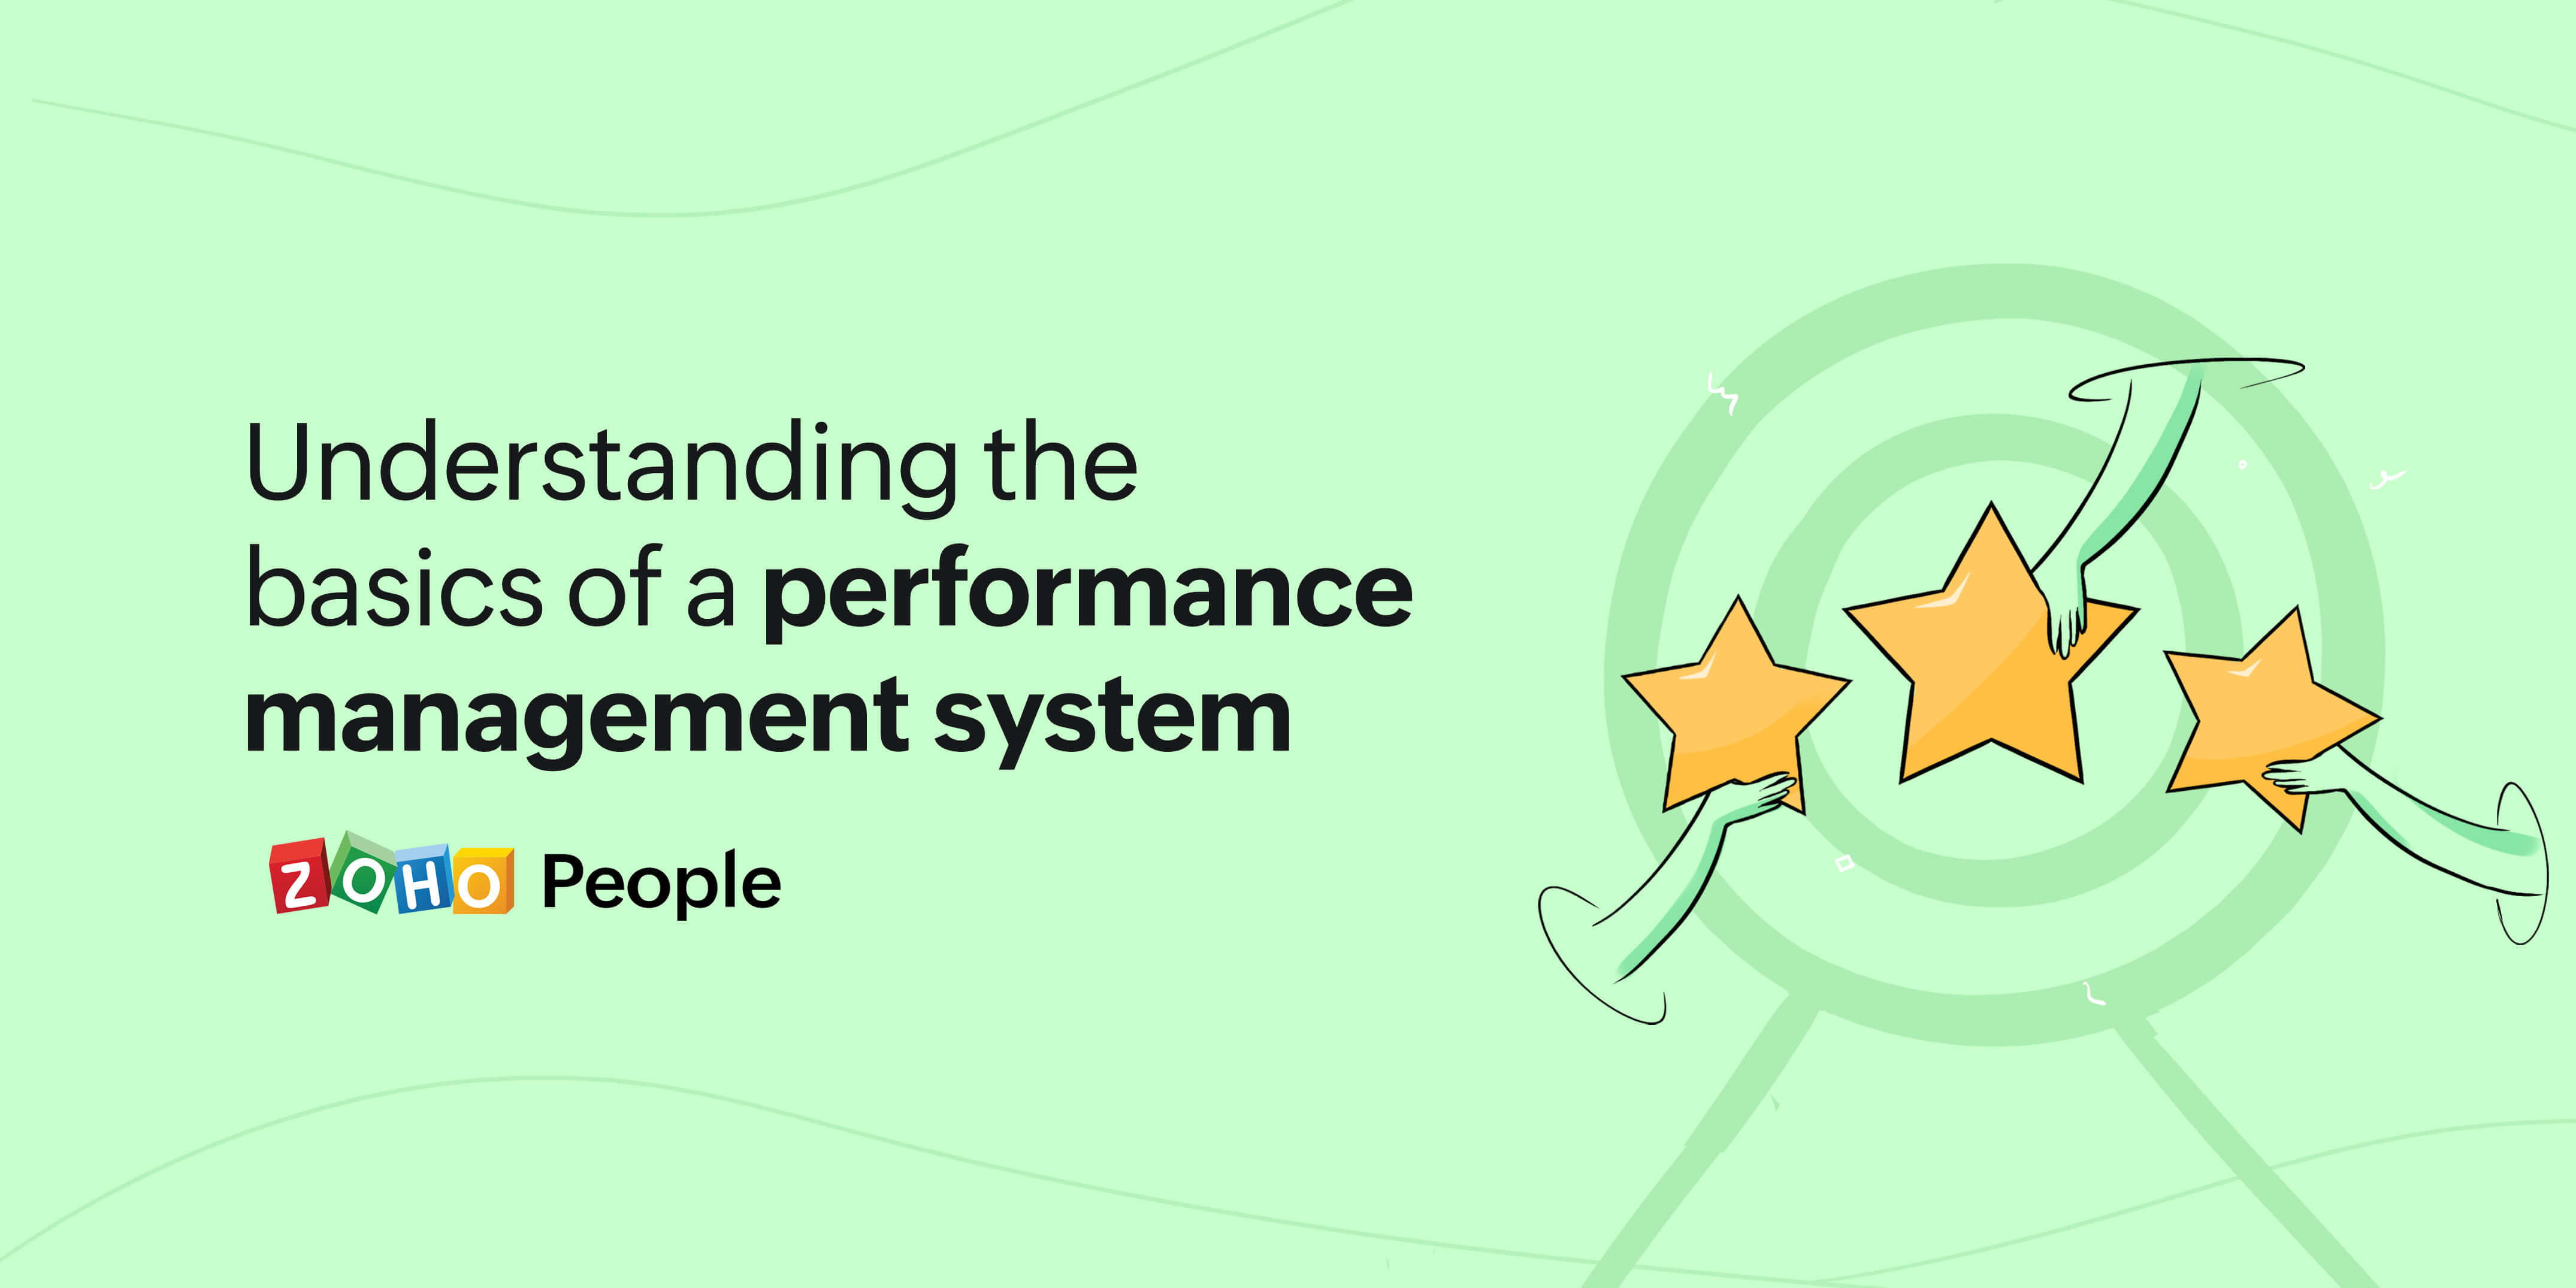 HR tech basics: Breaking down the basics and benefits of a performance management system